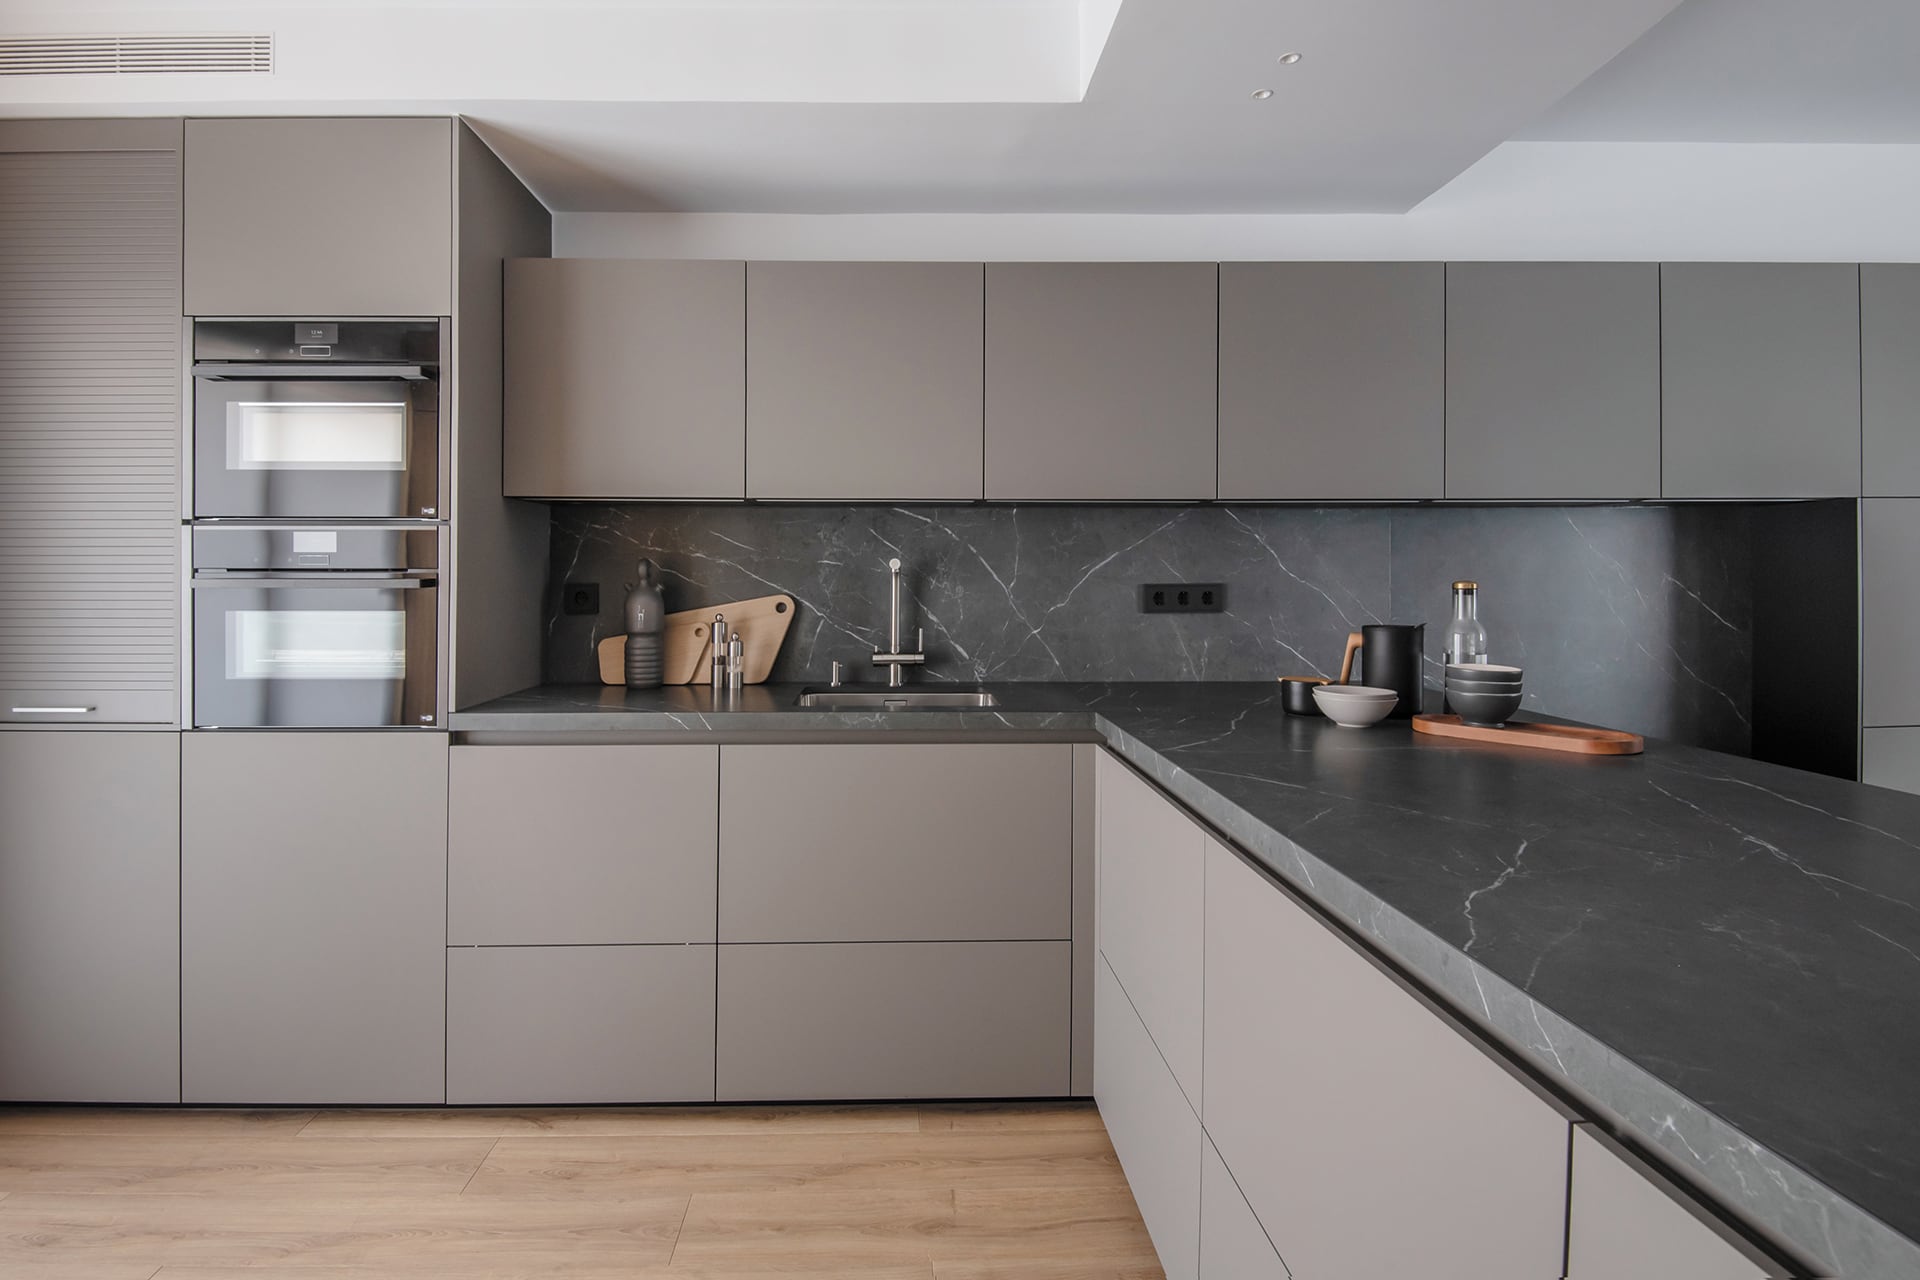 Grey Santos kitchen with peninsula and units